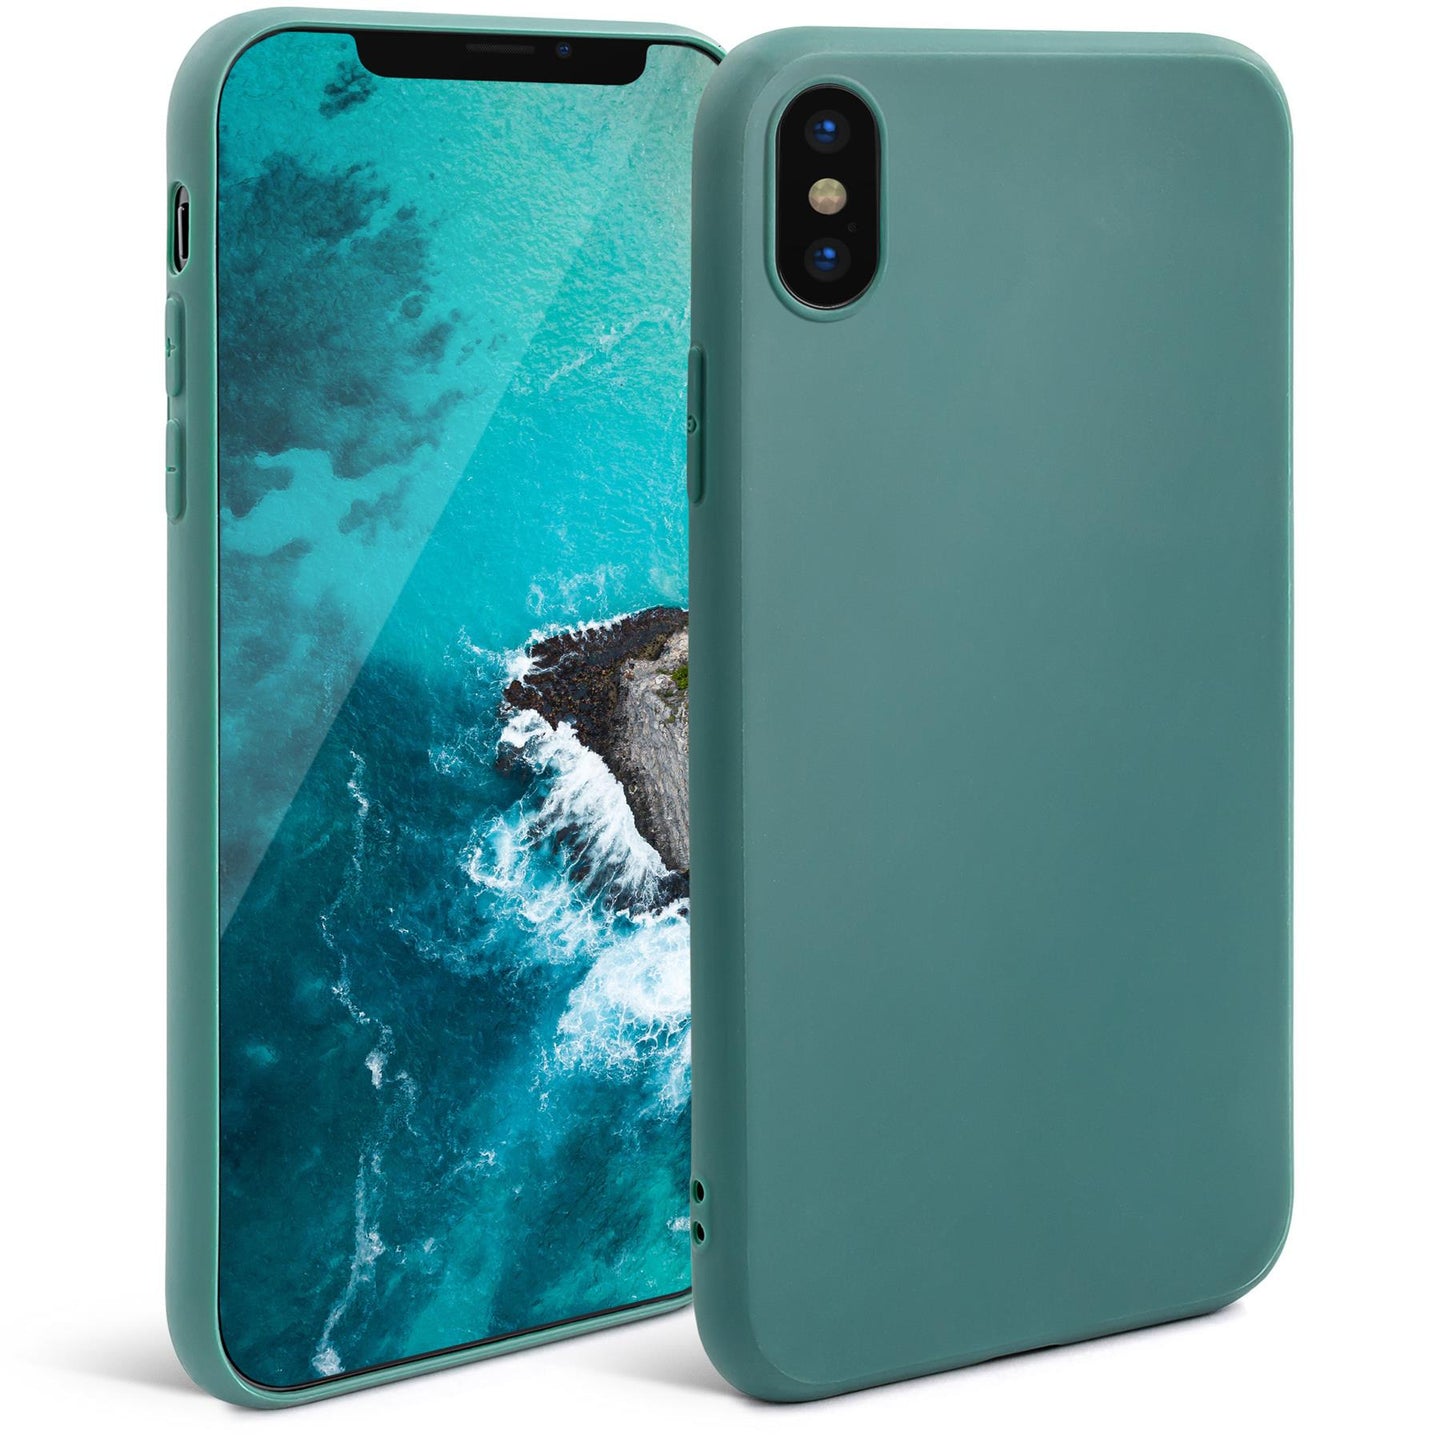 Moozy Minimalist Series Silicone Case for iPhone X and iPhone XS, Blue Grey - Matte Finish Slim Soft TPU Cover